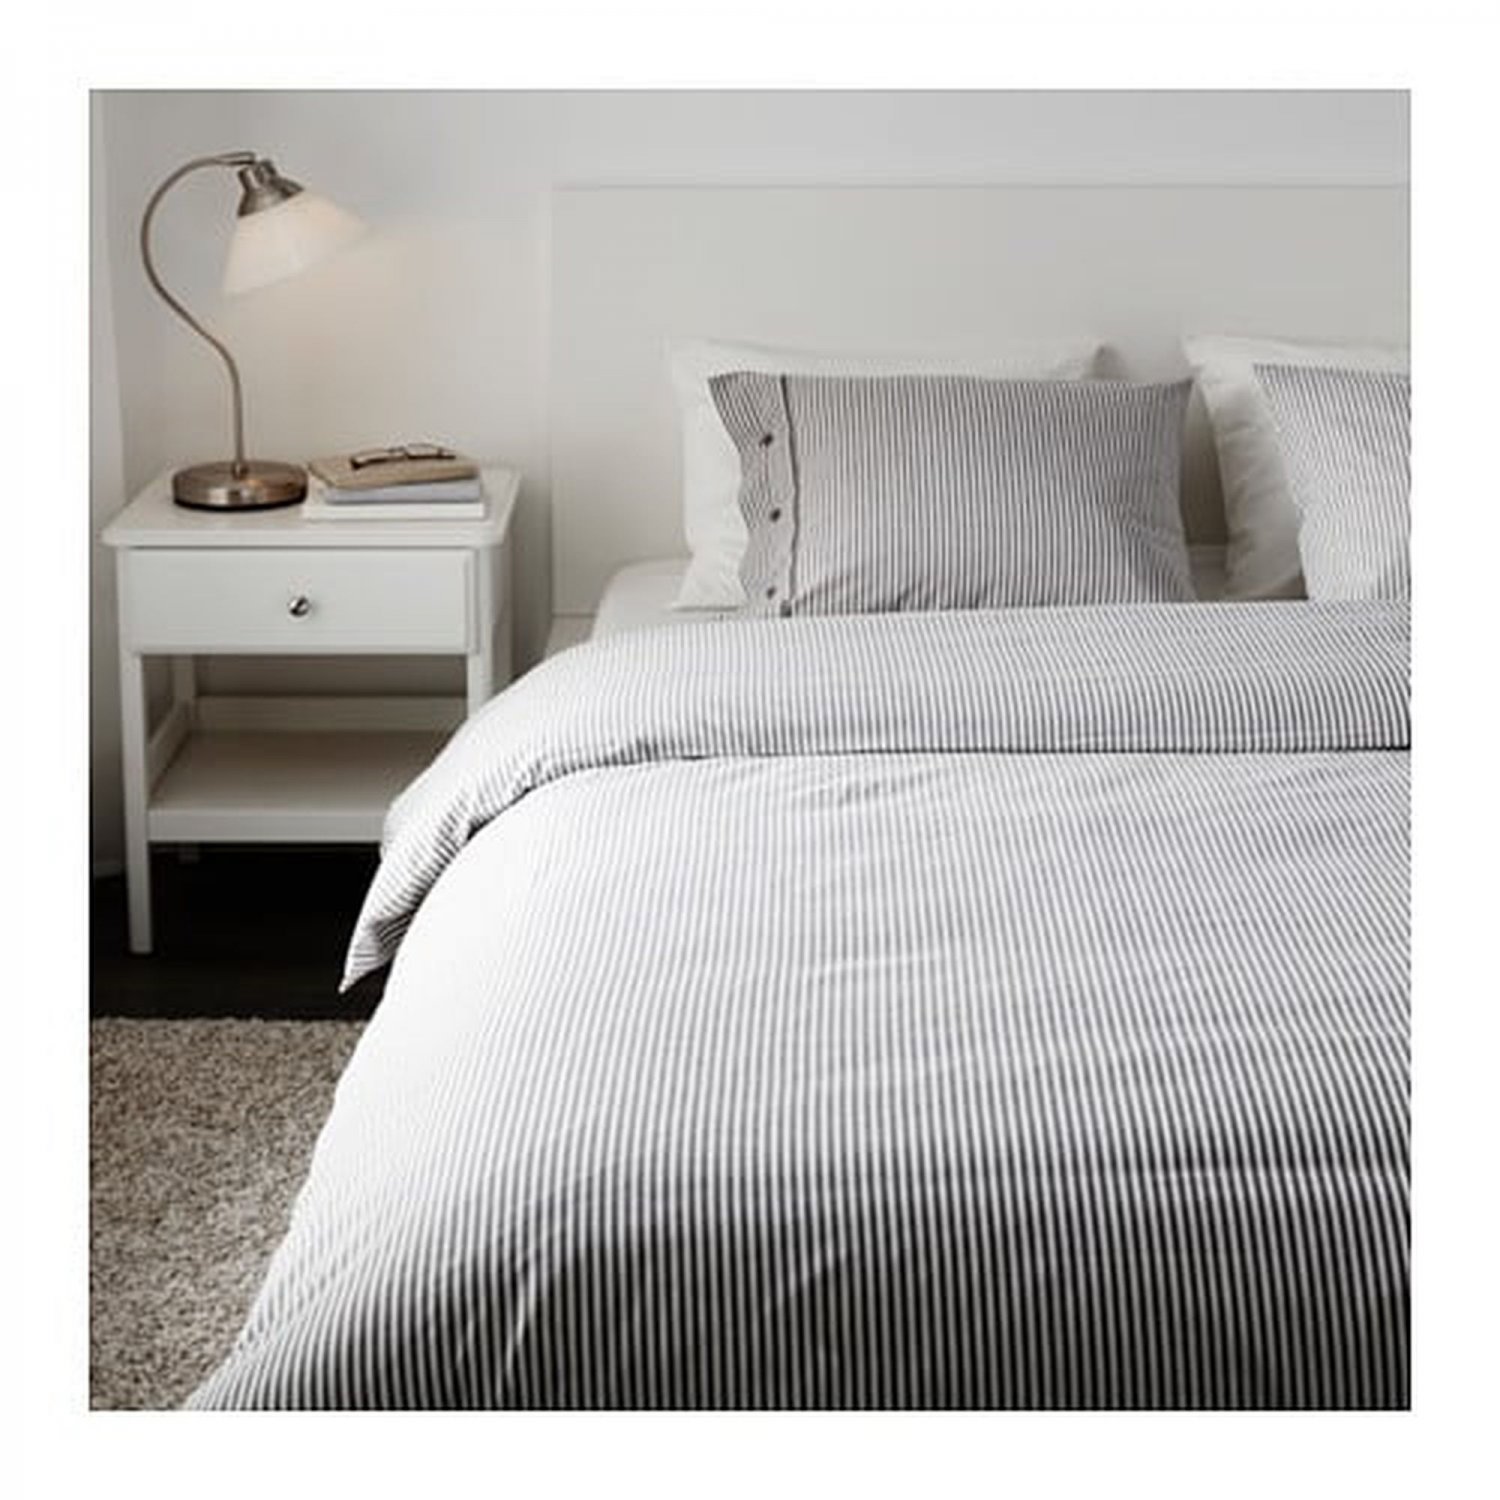 IKEA Nyponros QUEEN Full DUVET COVER Set TICKING STRIPES GRAY Yarn Dyed SOFT Grey